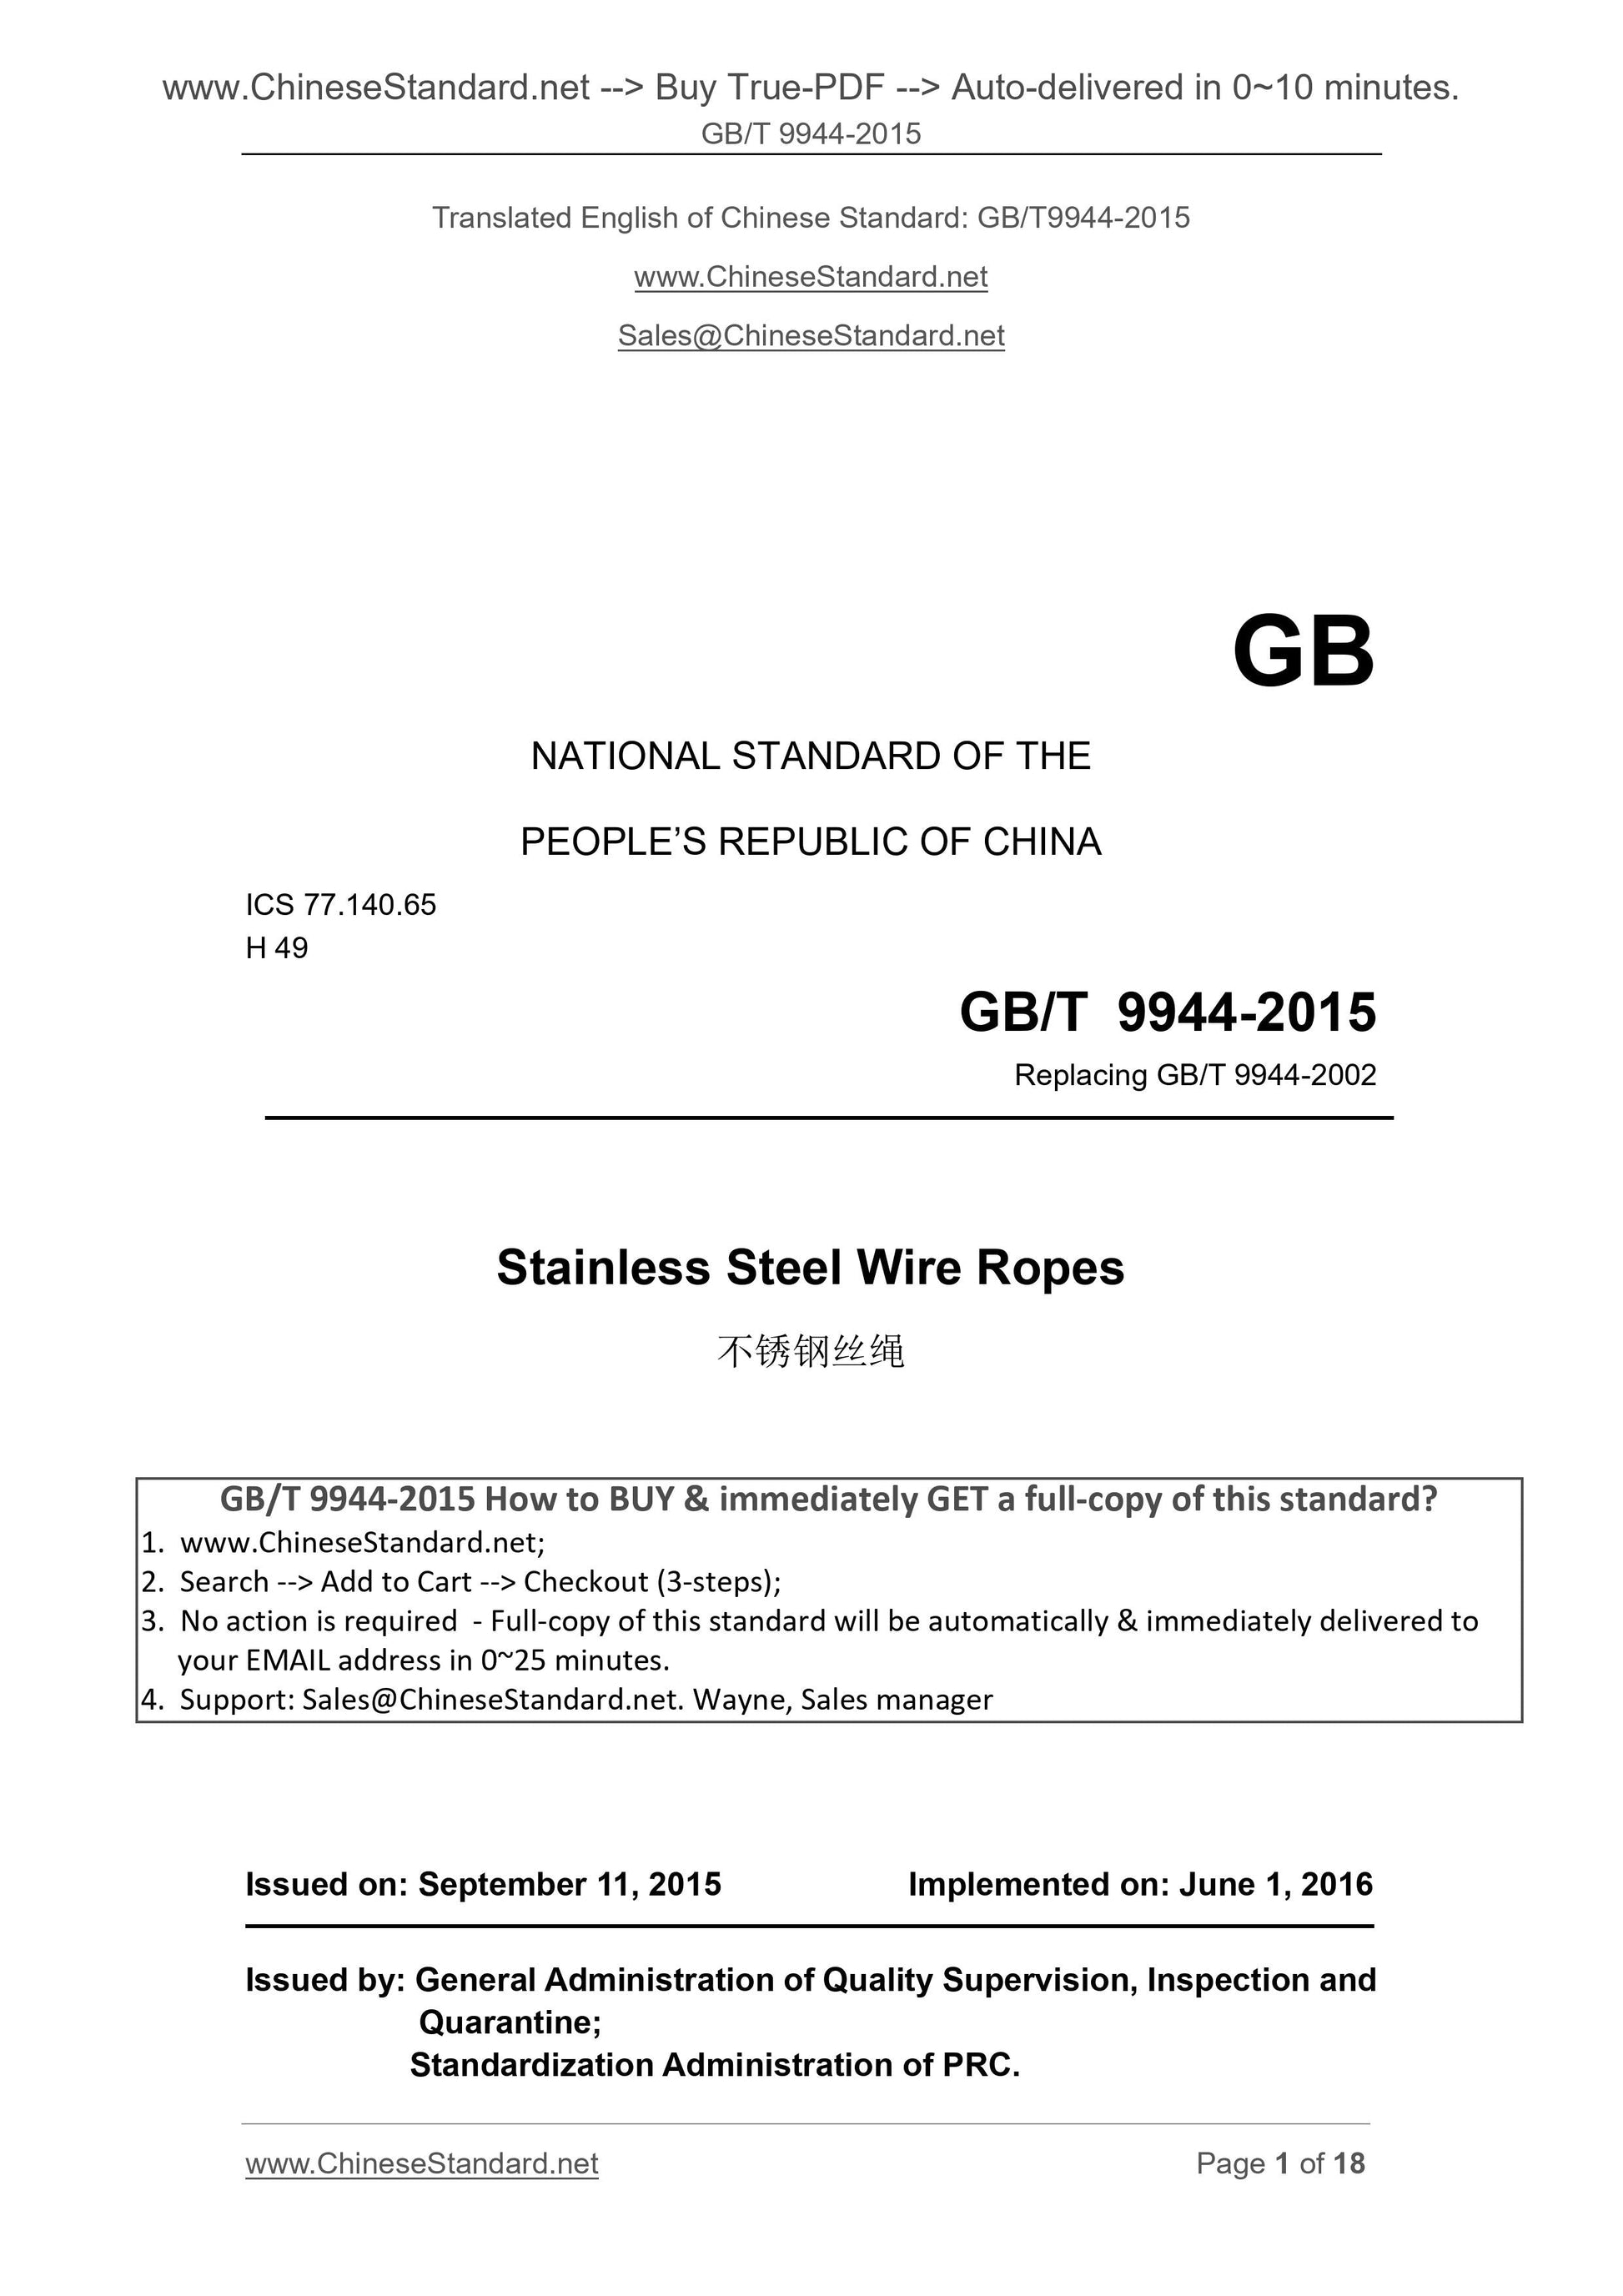 GB/T 9944-2015 Page 1